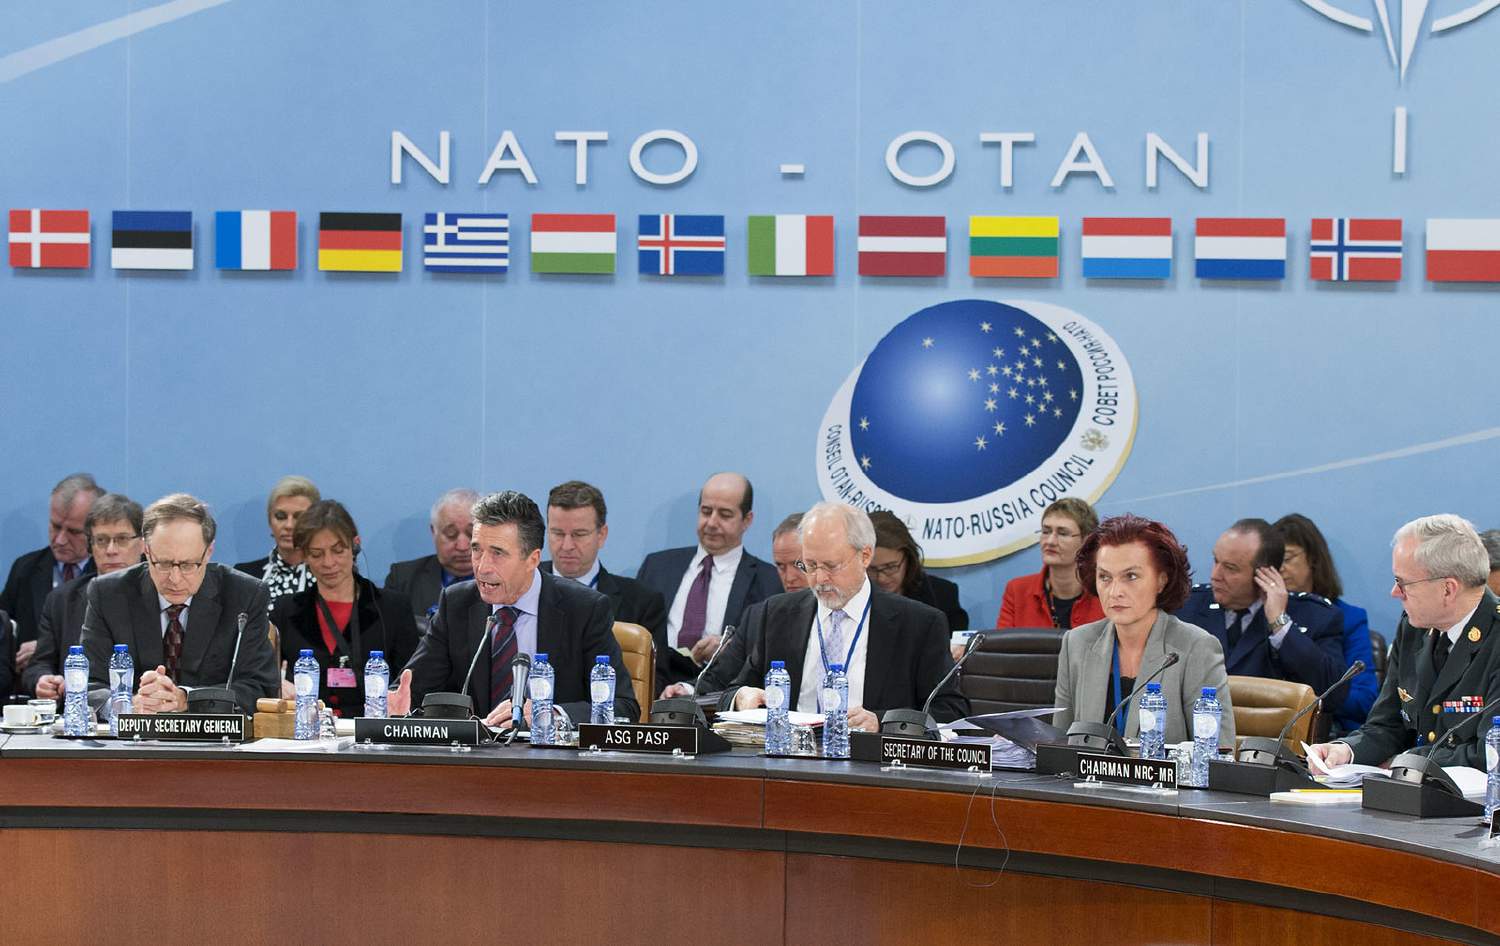 What is Nato's role in an interconnected world?